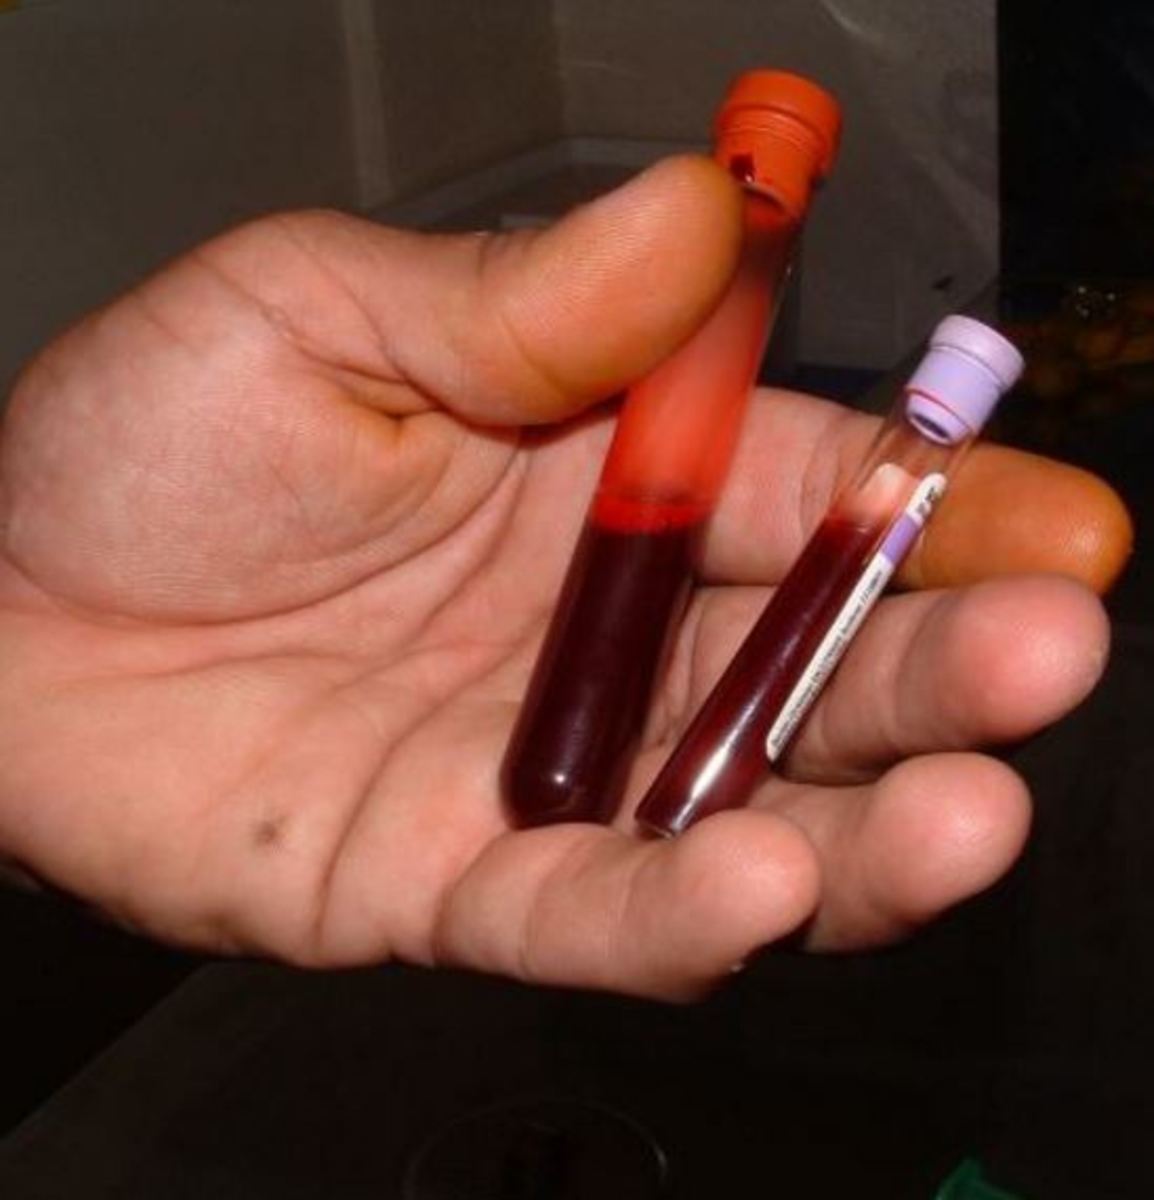  The results of the blood test showed very low level of thrombocytes.